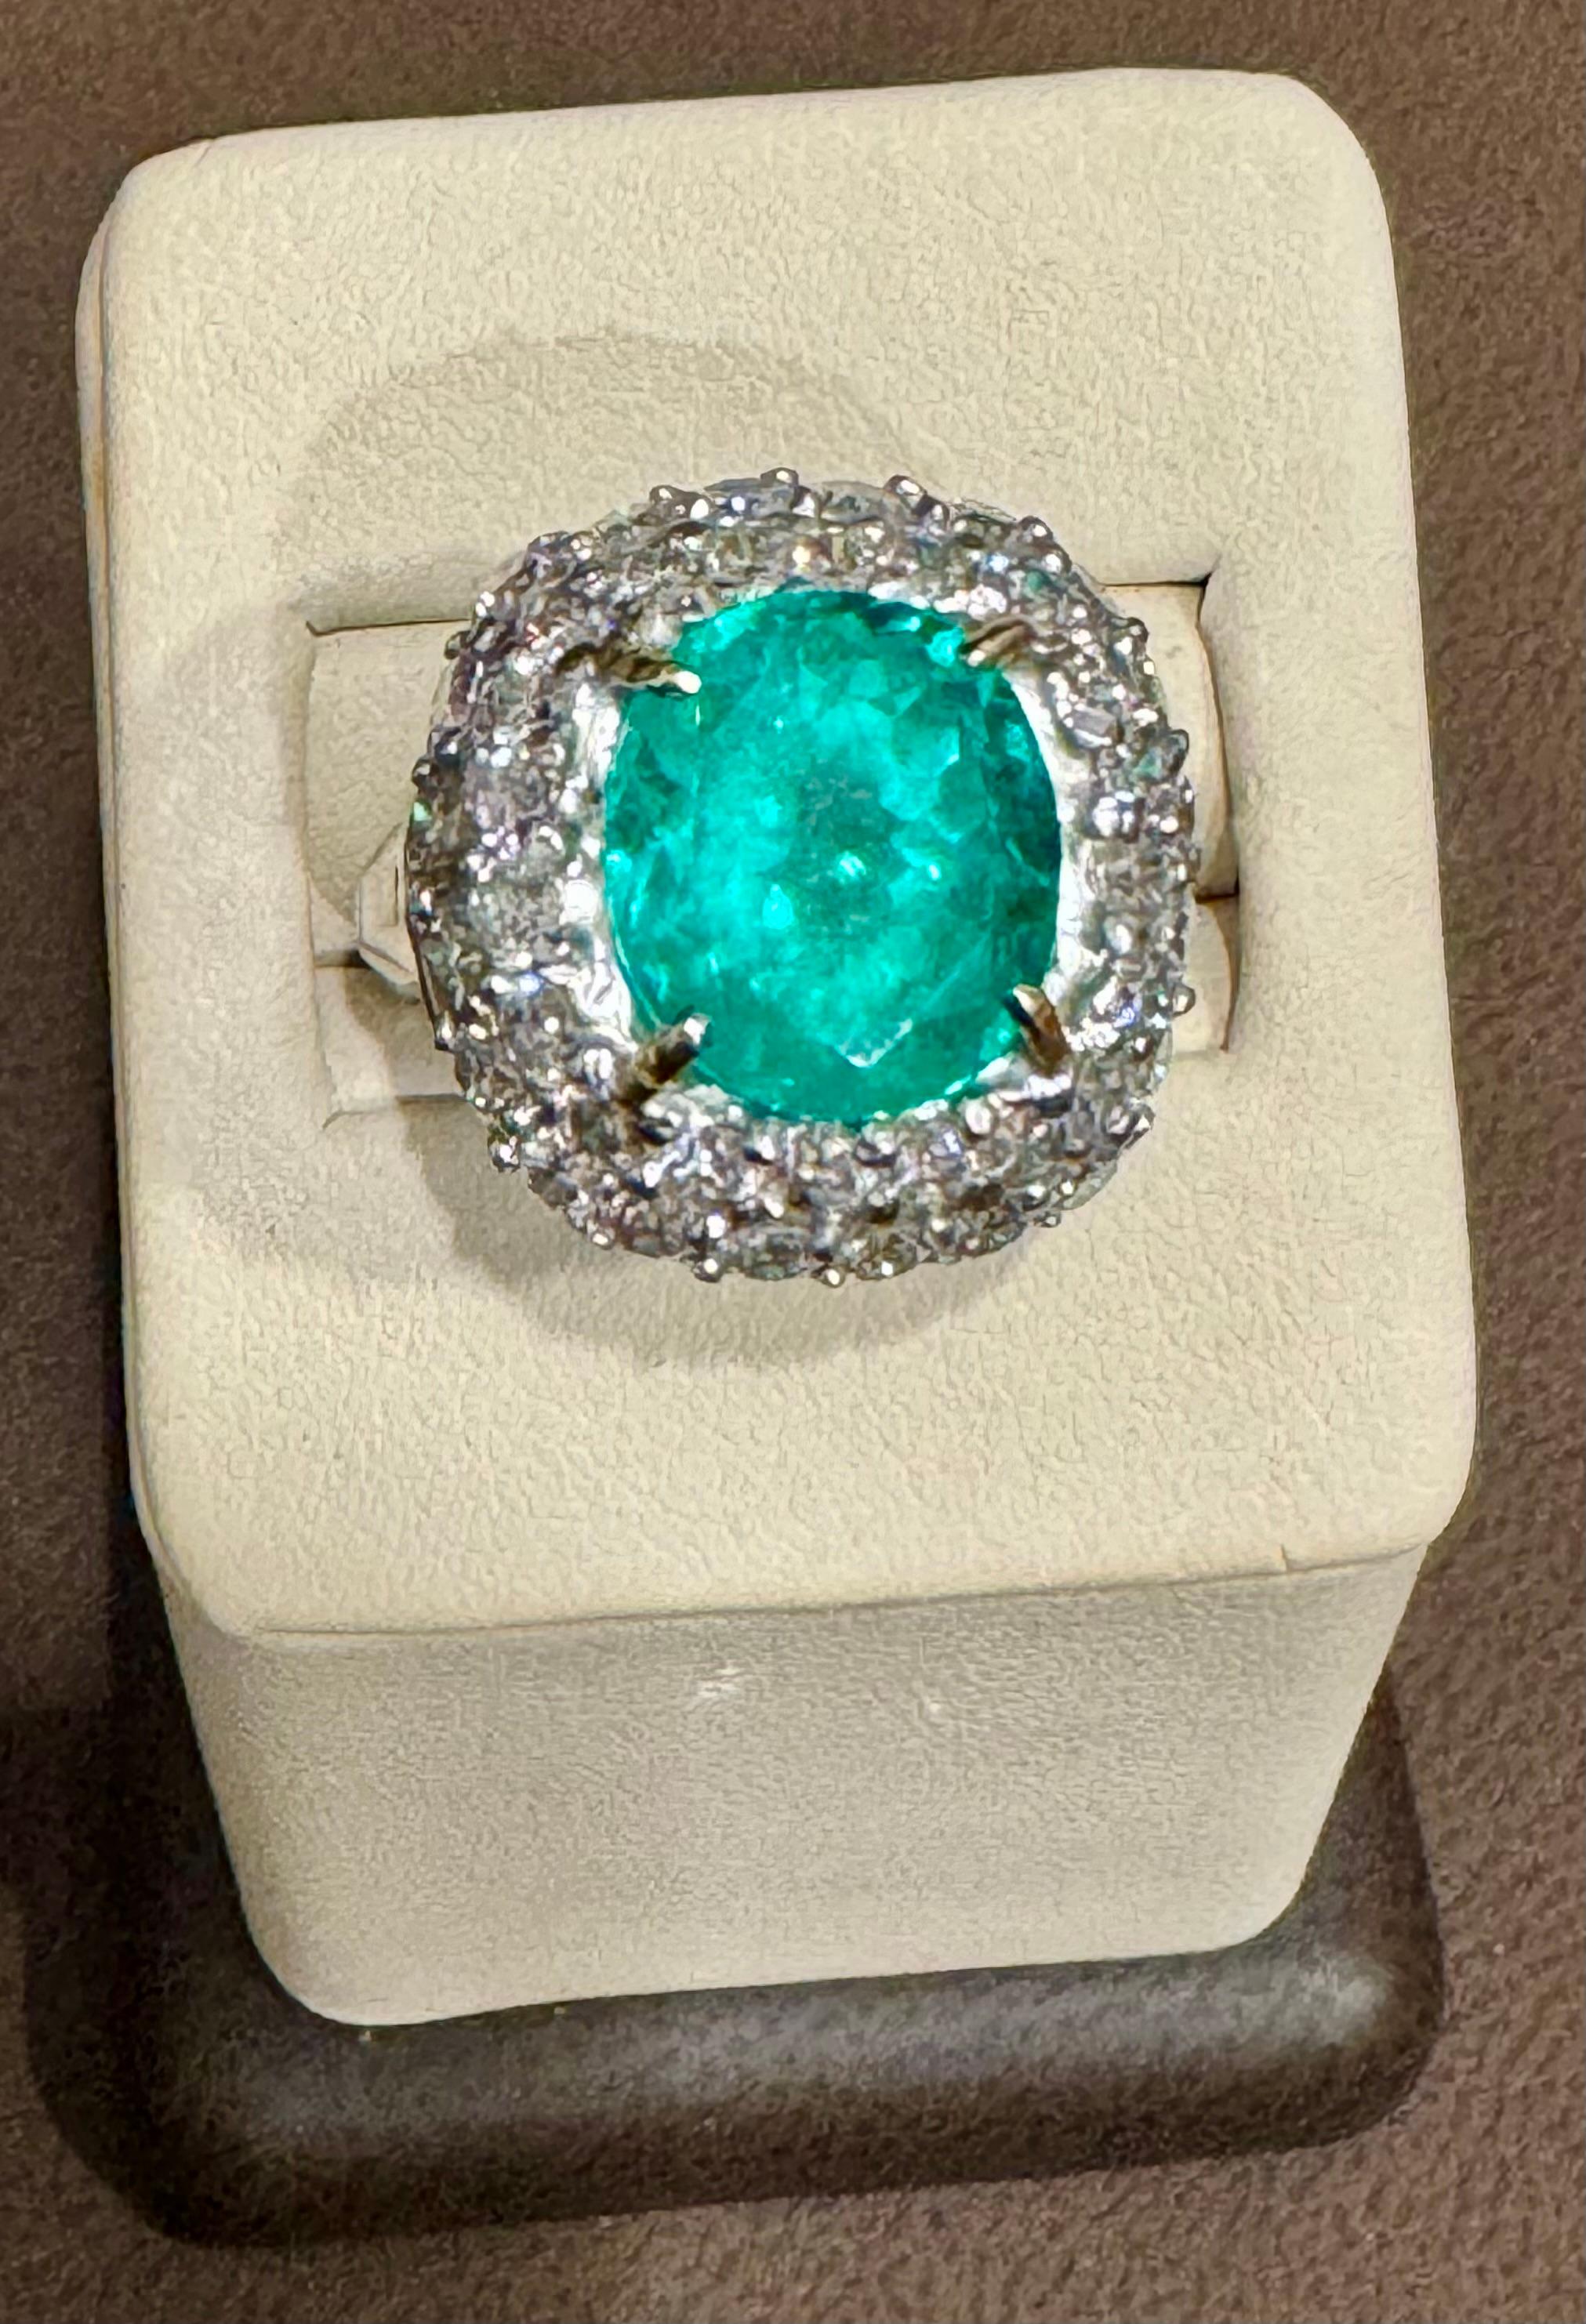 7 Carat Cushion Cut Colombian Emerald & 3.5 Ct Diamond Ring in Platinum Size 6.2 For Sale 5